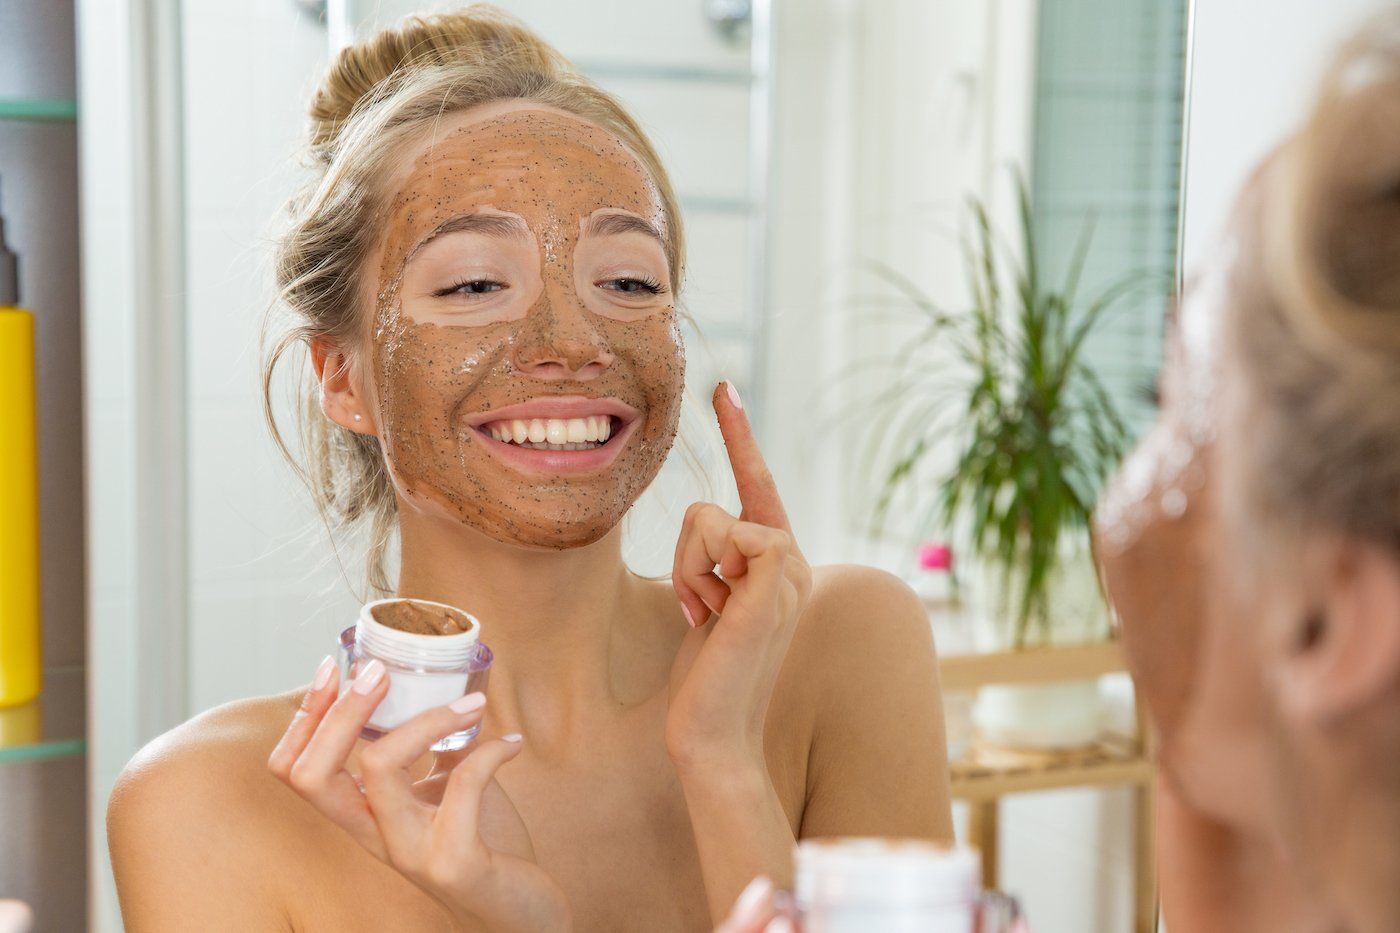 How to Exfoliate Your Skin The Right Way